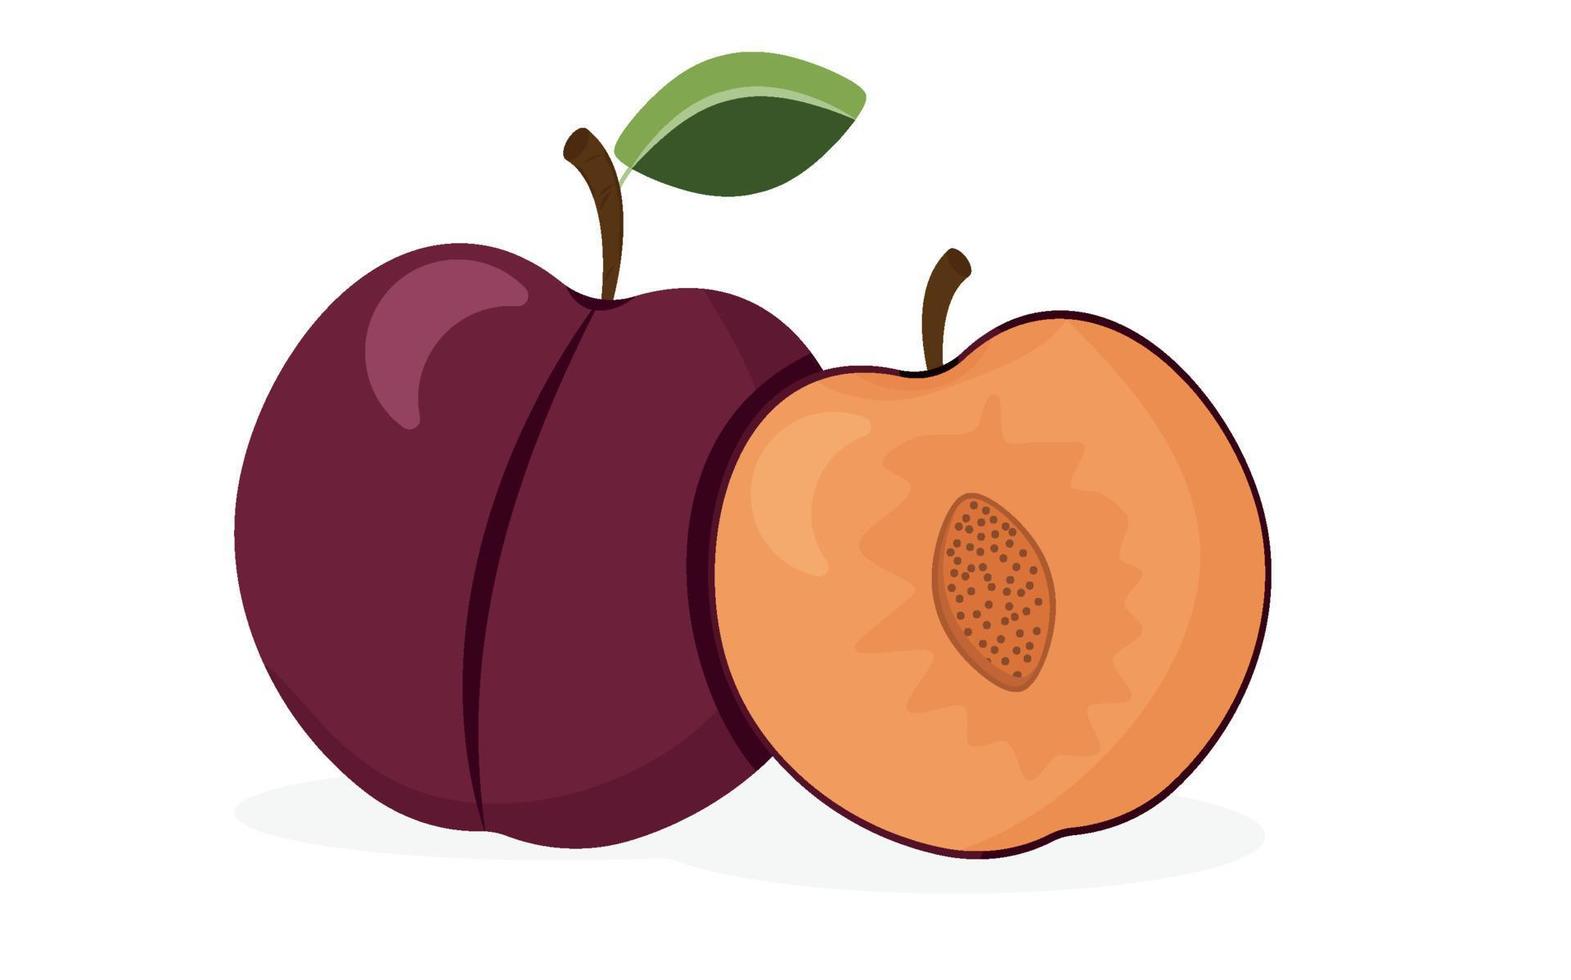 Plums on a white background. Juicy purple plum fruits. Whole and half fruit. Vector illustration